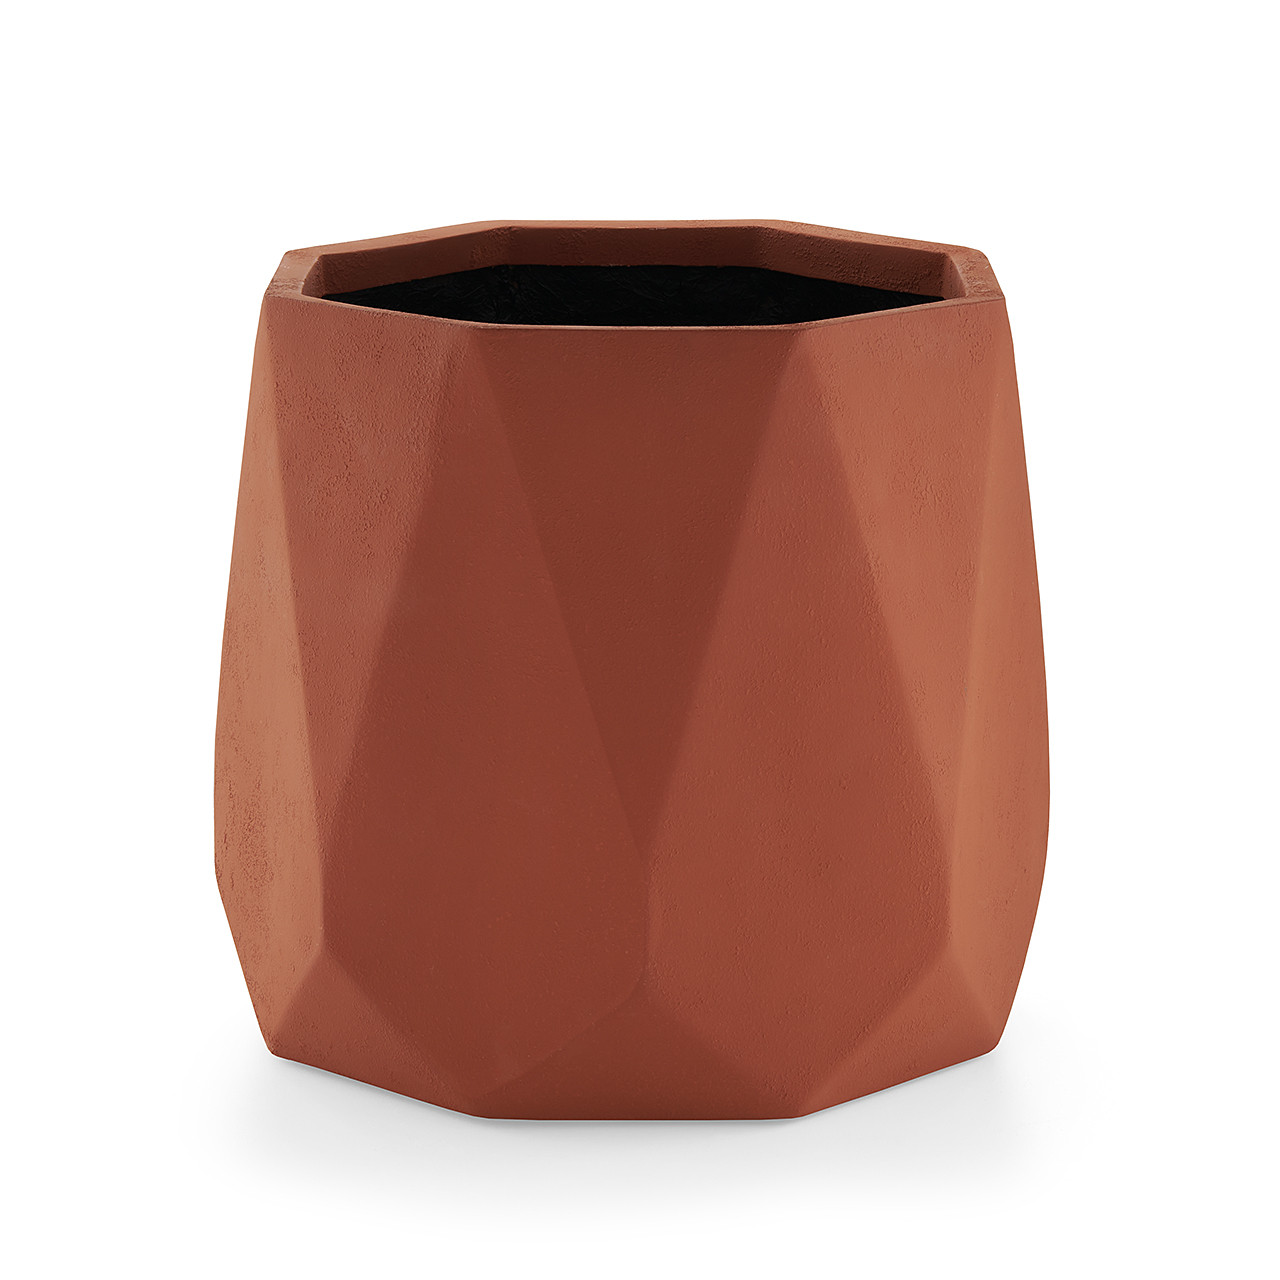 In-Store Only - 10.6 in. x 11.4 in. Medium Terracotta Octagon Planter